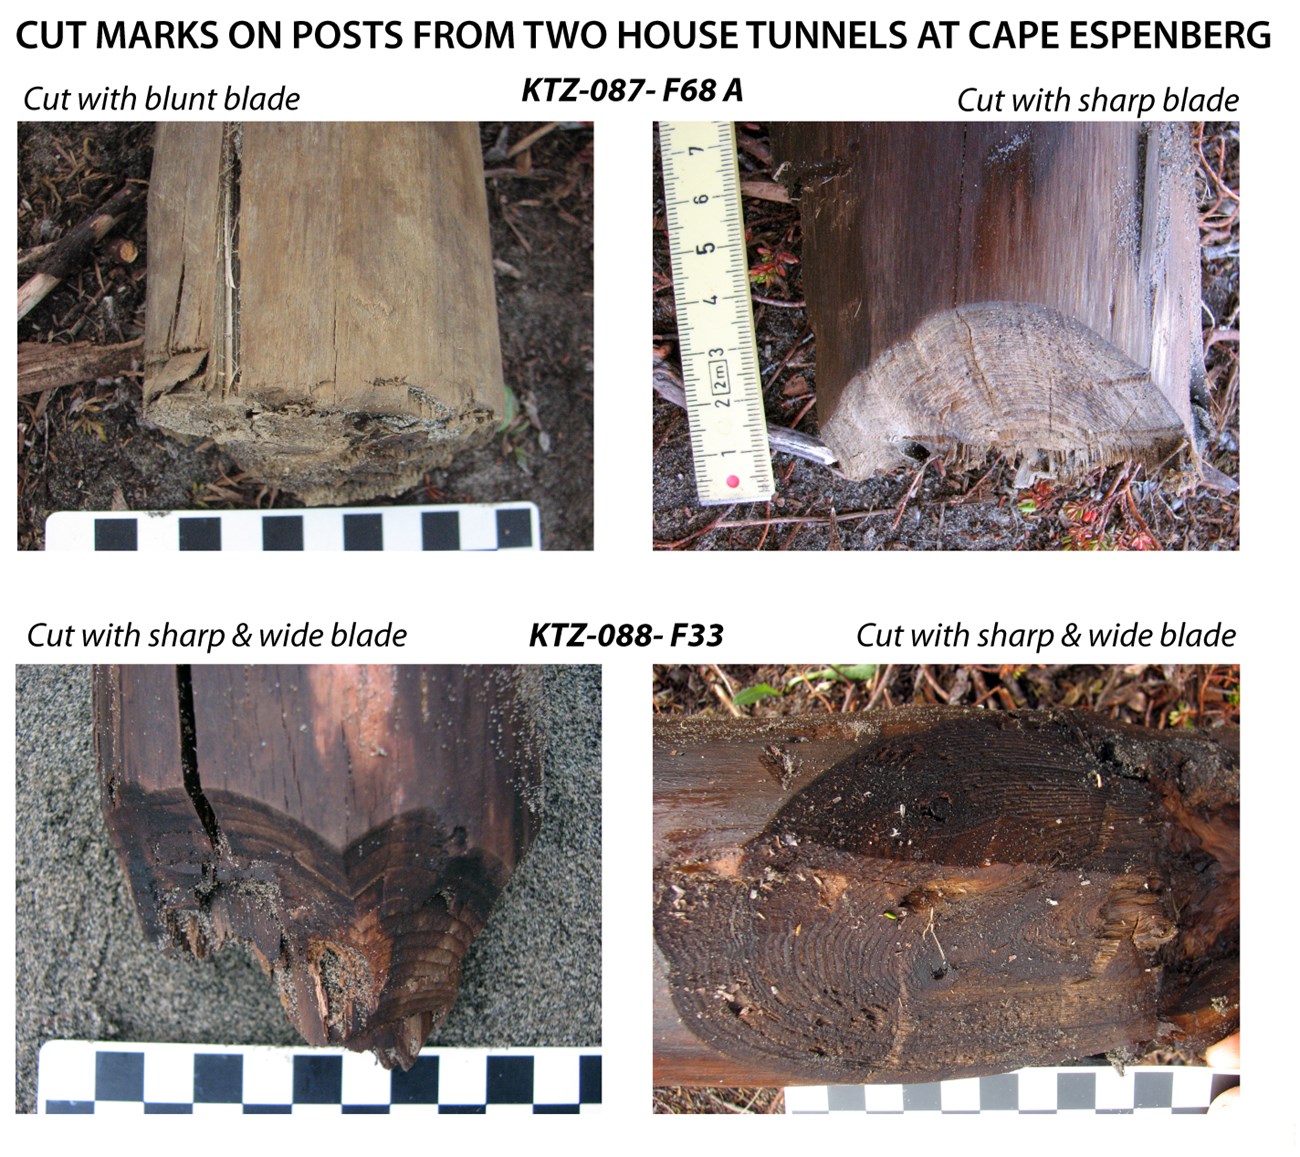 Images depicting different cut marks from two house tunnels at Cape Espenberg.